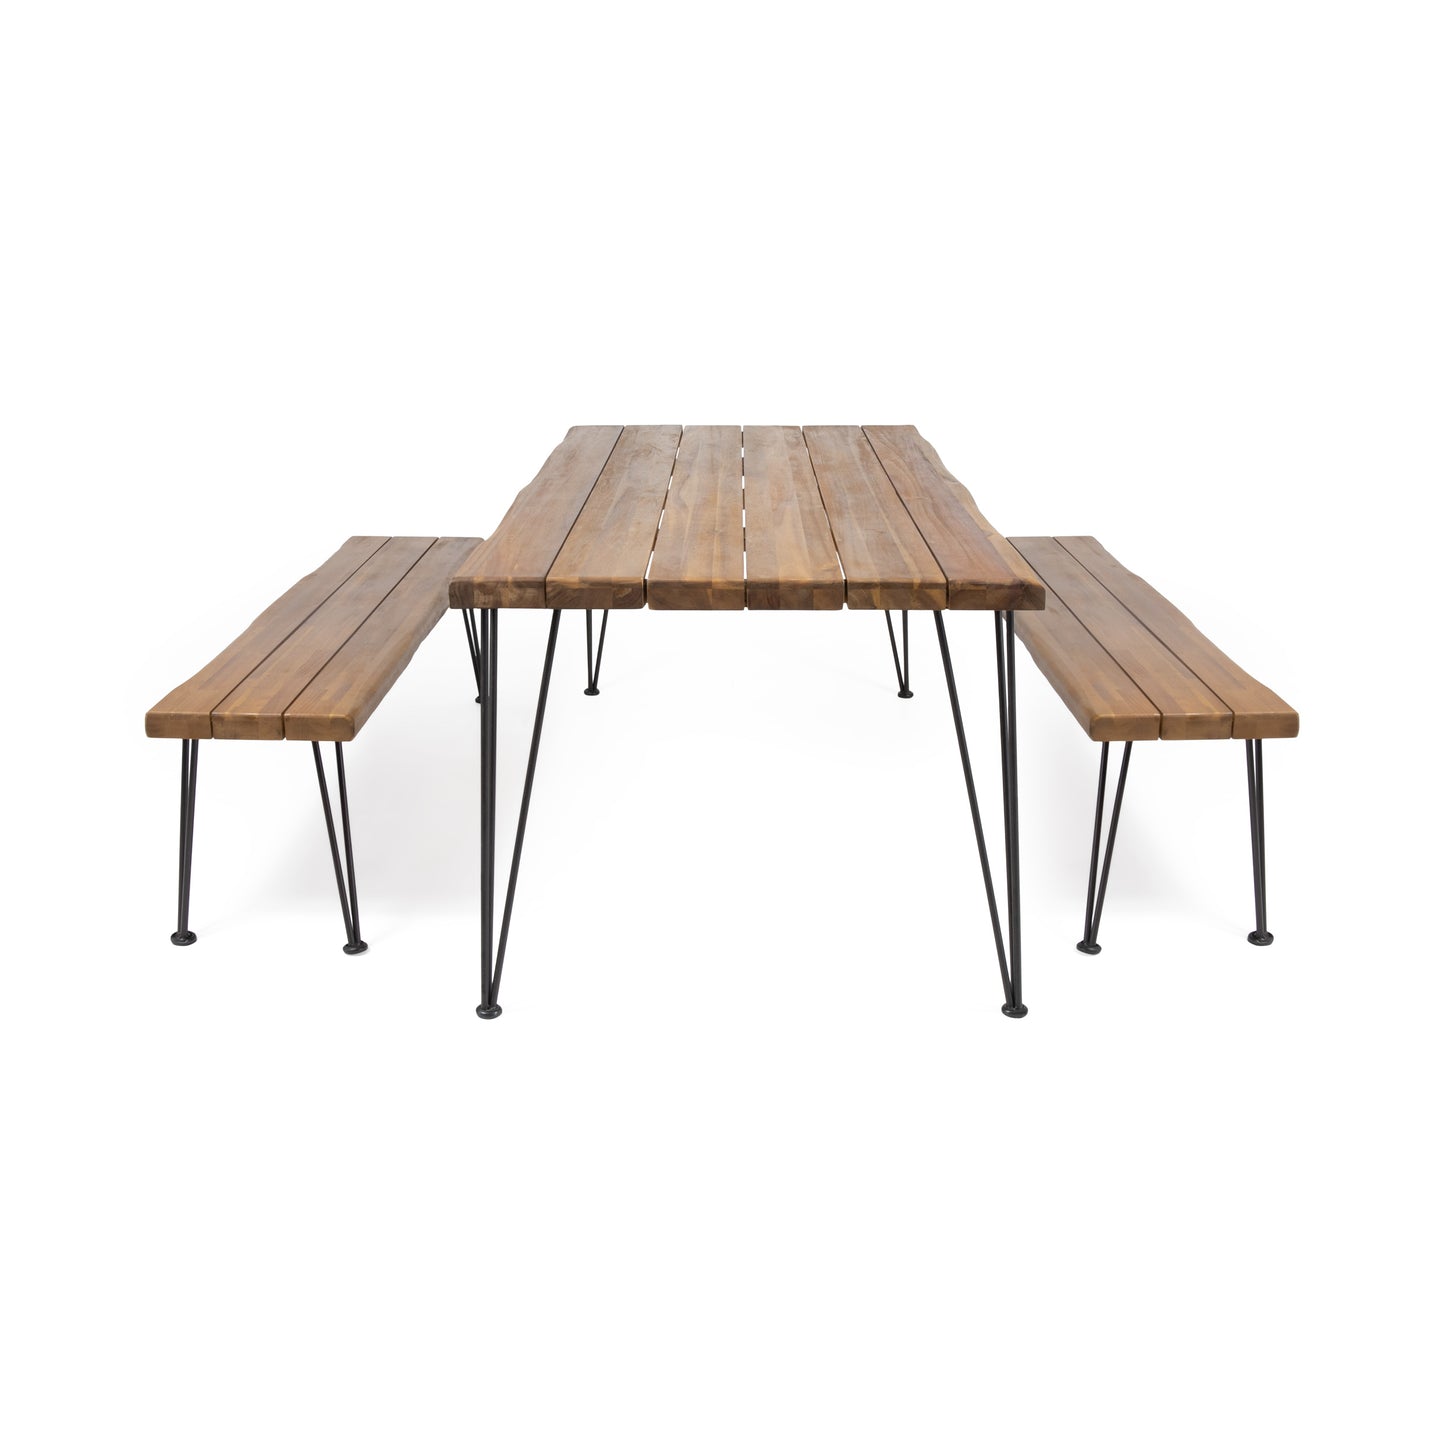 Zephyra Outdoor Modern Industrial 3 Piece Acacia Wood Picnic Dining Set with Metal Hairpin Legs